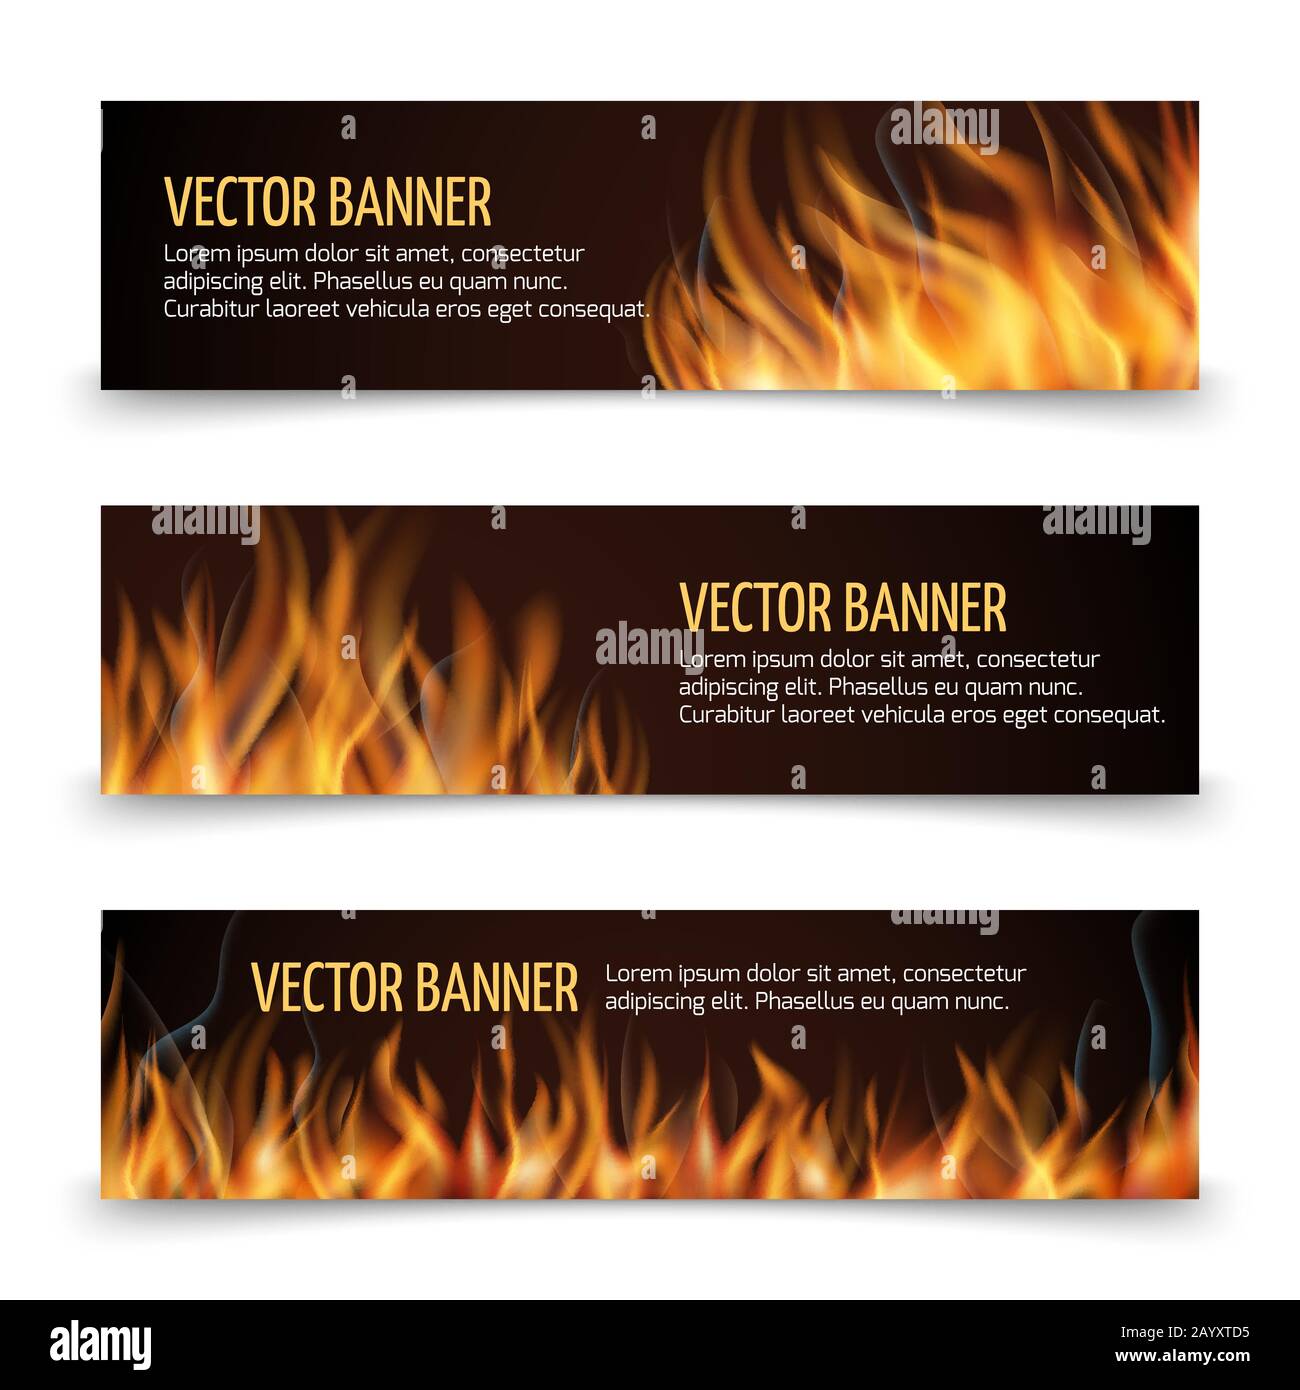 Hot fire advertisement vector horizontal banners set. Banner with flame and fire, advertising banner fiery heat illustration Stock Vector